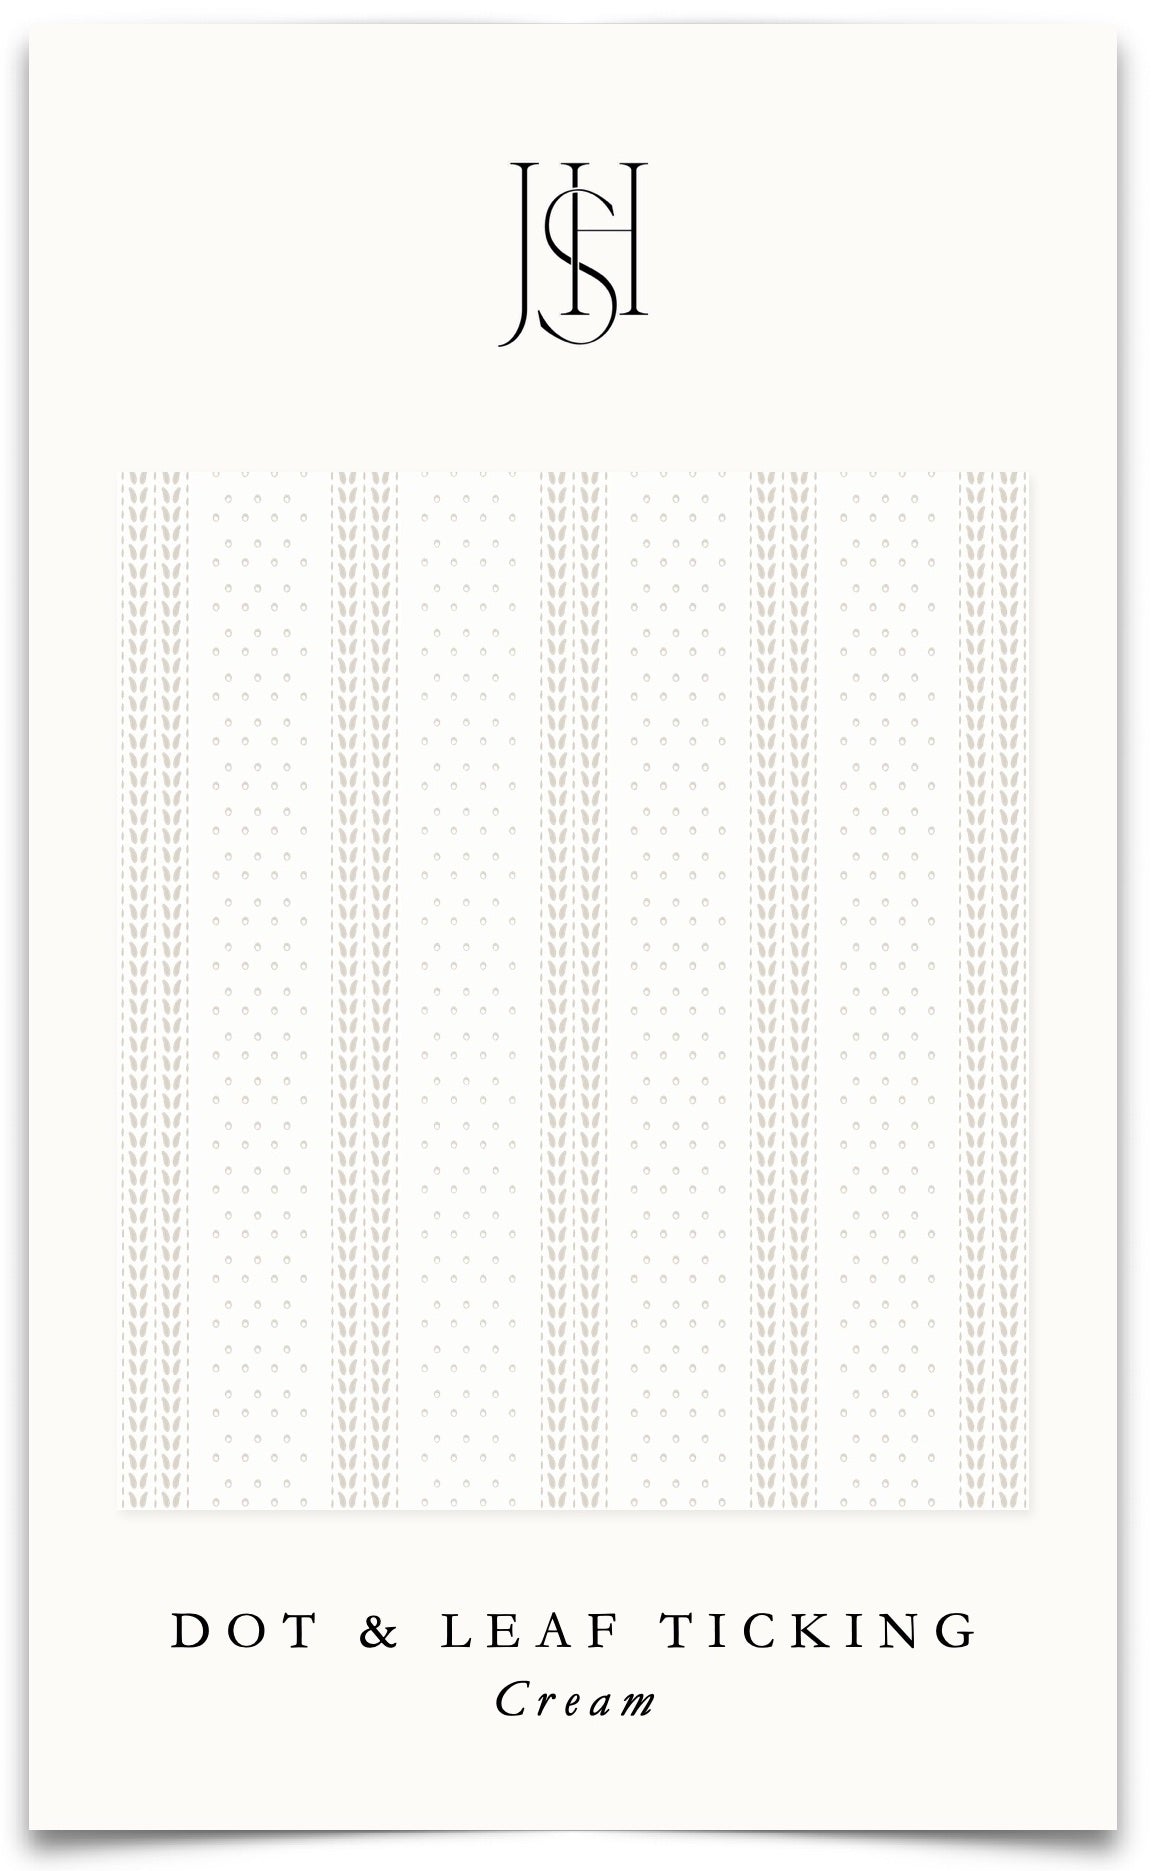 Dot & Leaf Ticking in Cream Fabric by the Yard